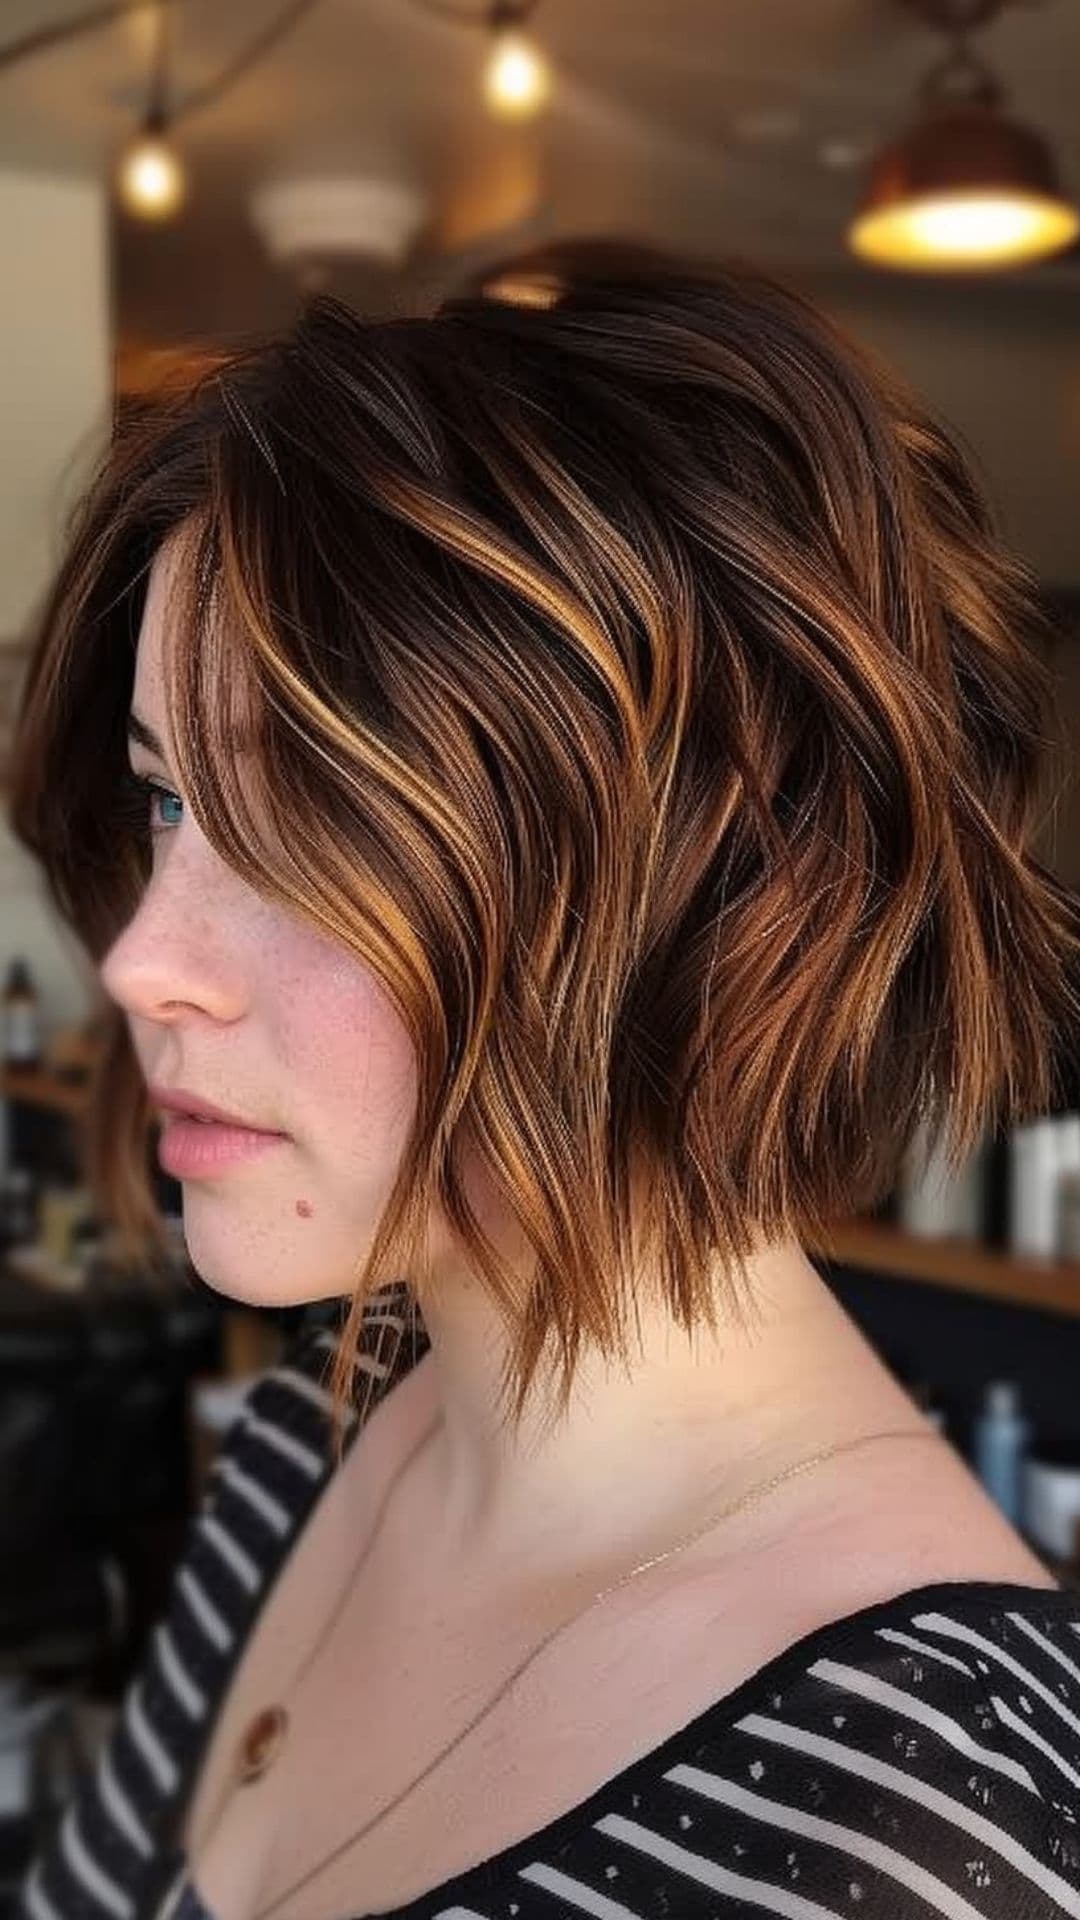 A woman modelling a bob with highlights haircut.